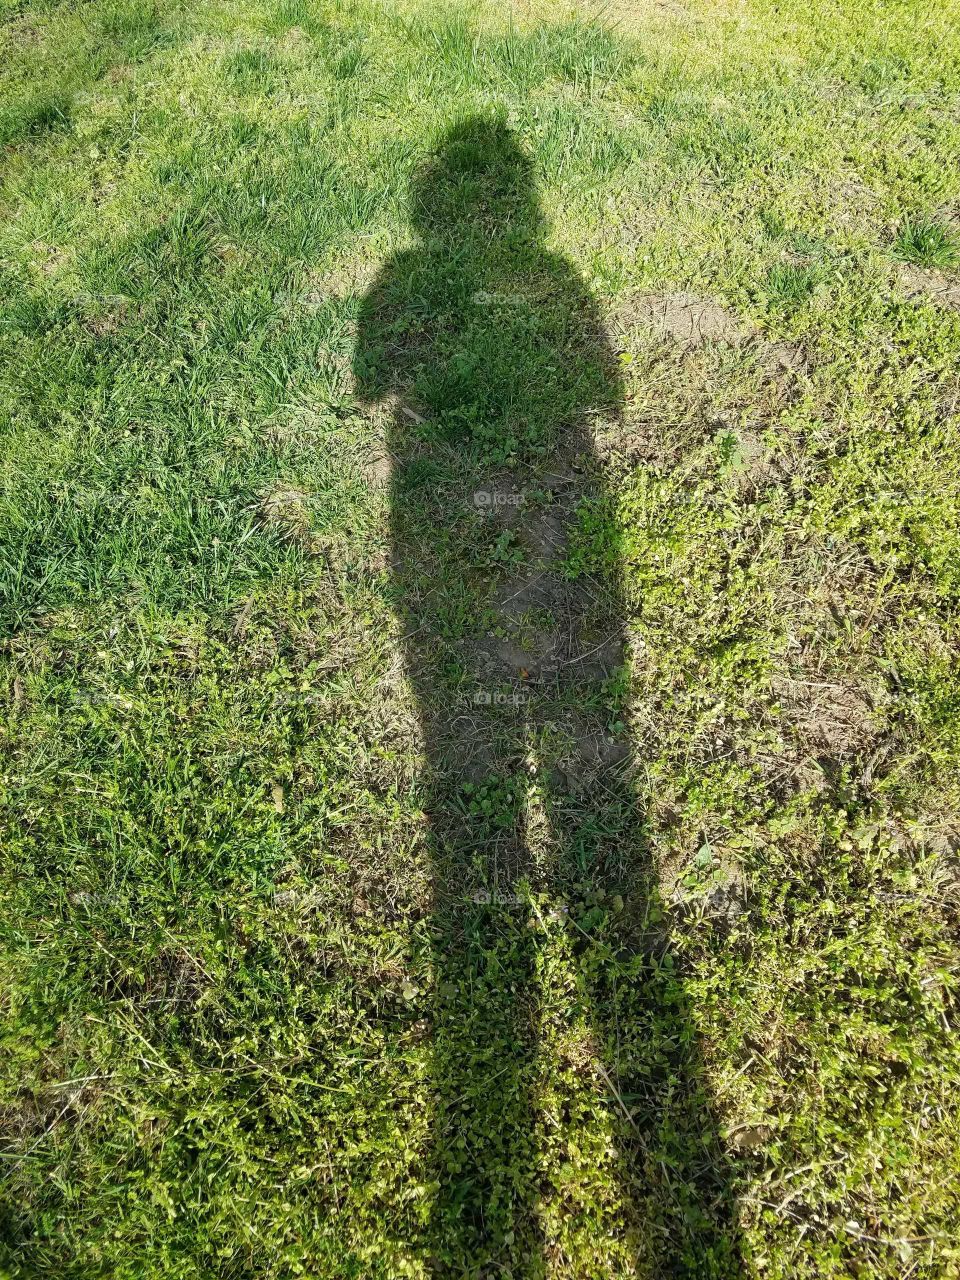 And whose shadow is this?